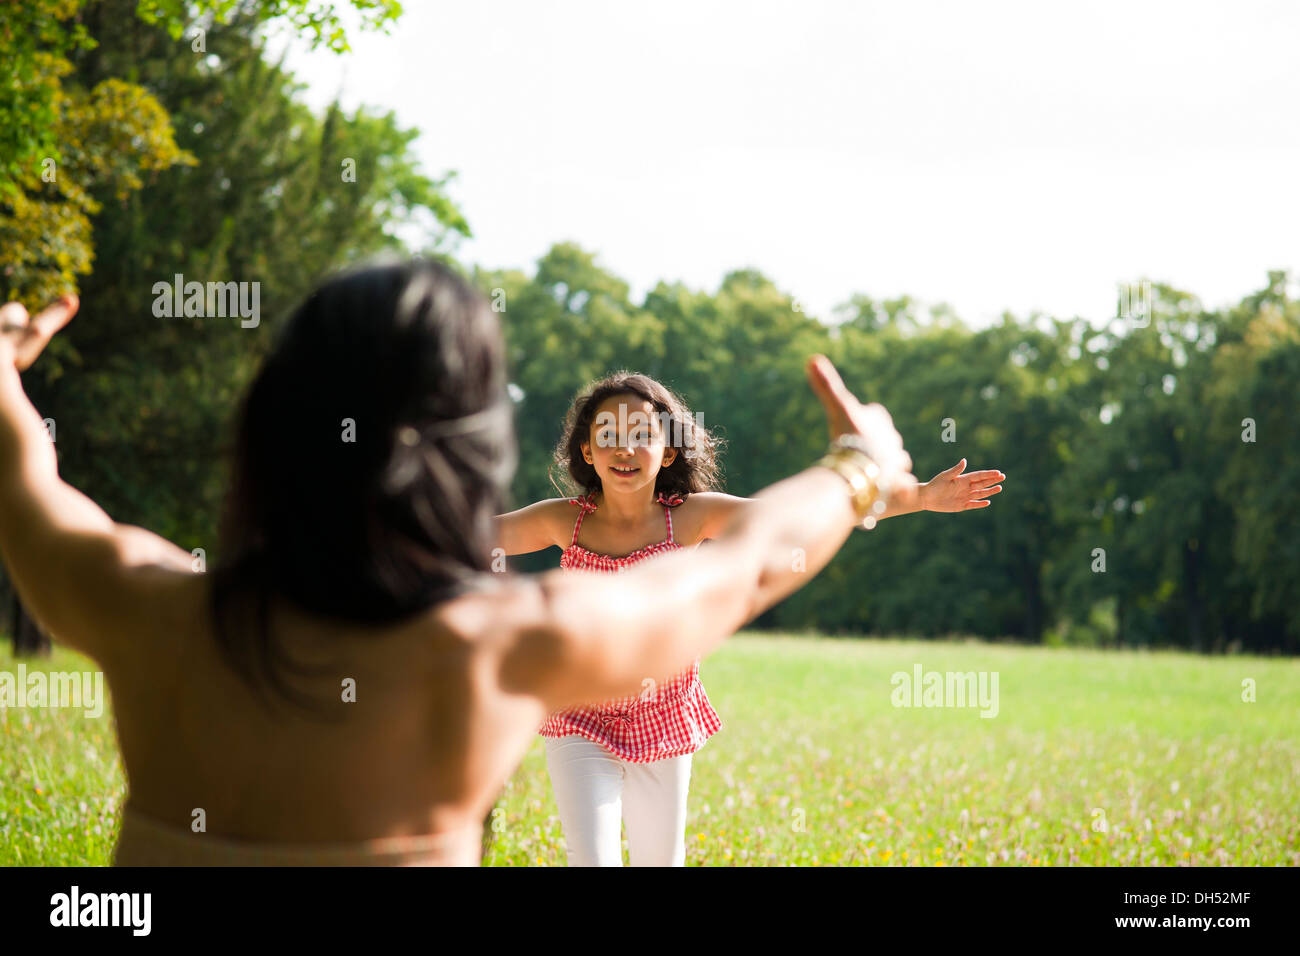 Girl running towards her mother with outstretched arms Stock Photo